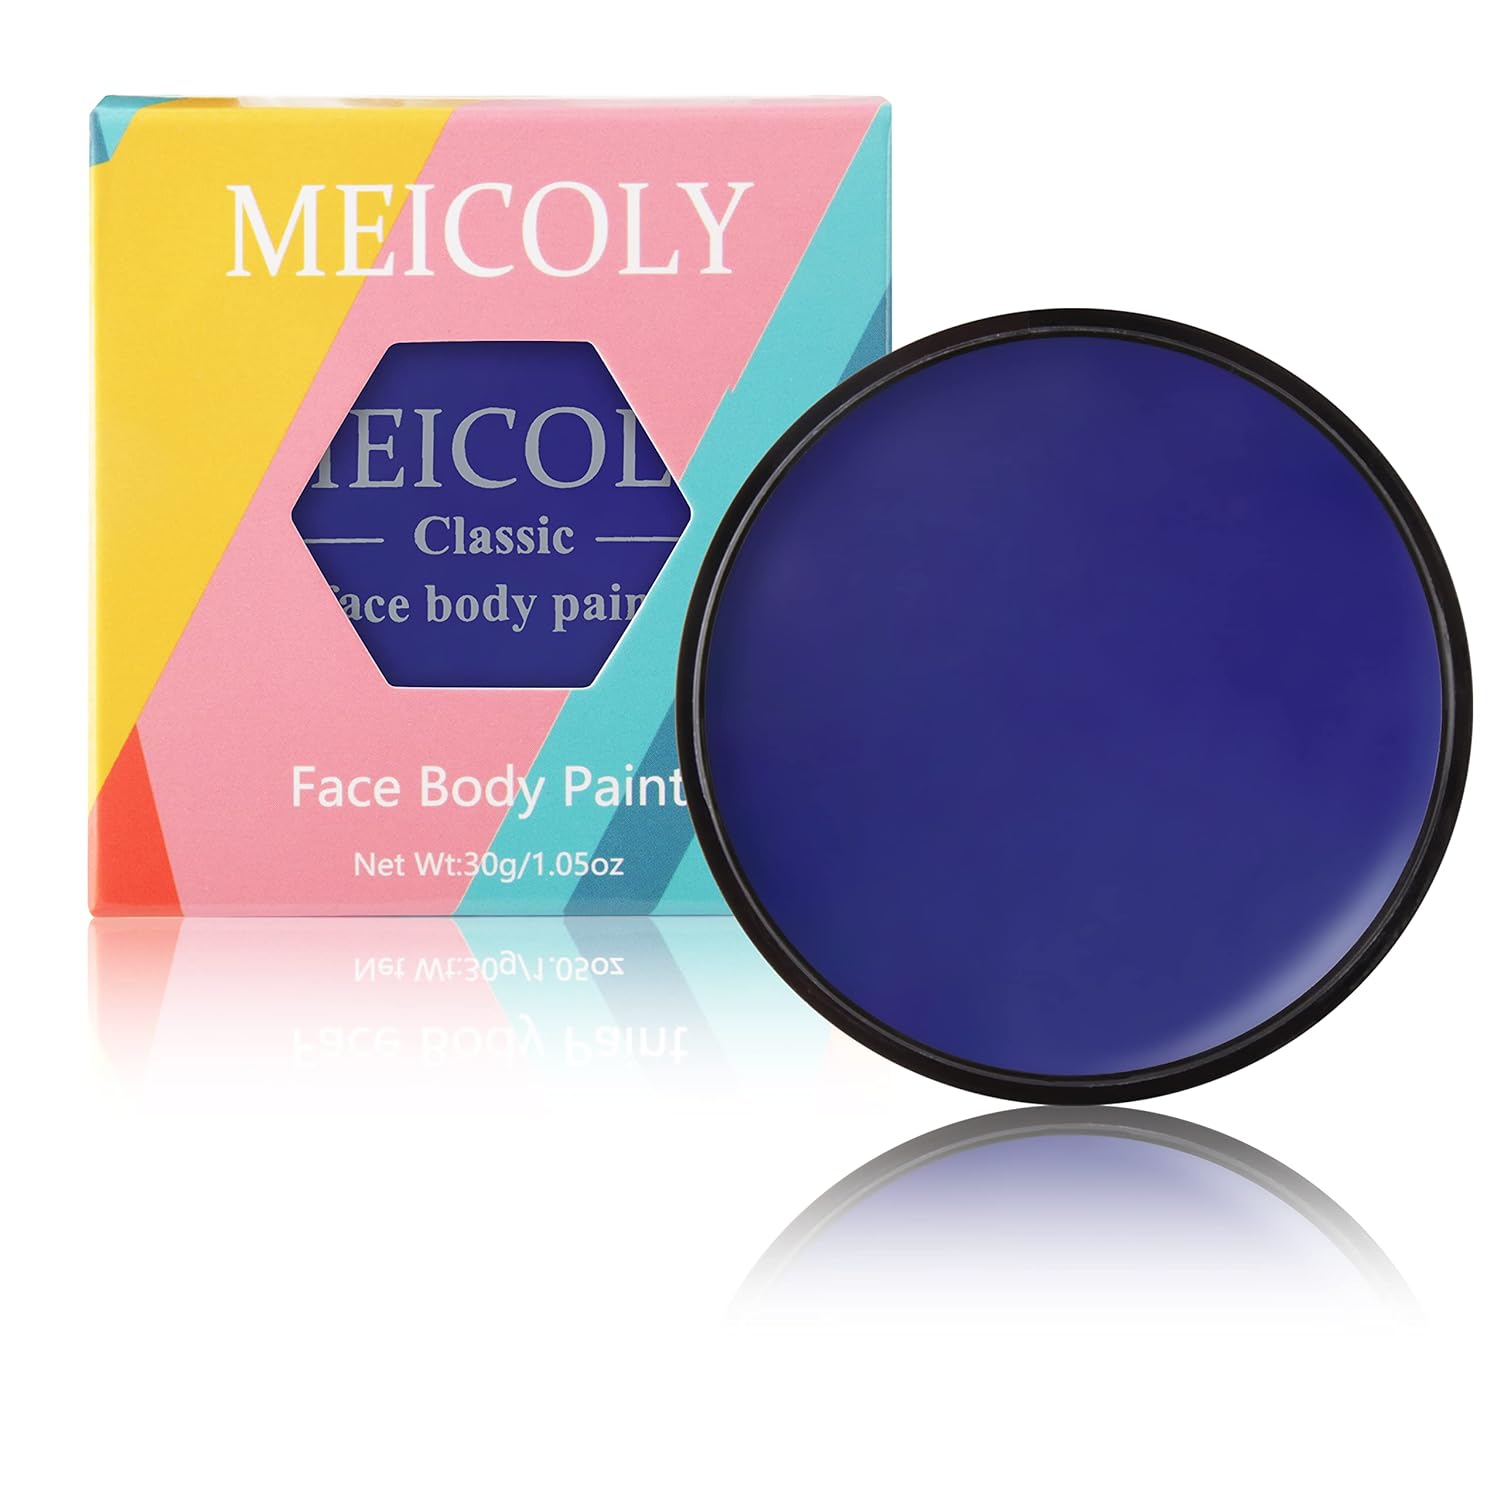 MEICOLY Green Face Body Paint Stick(1.06 Oz) Green Eye Black